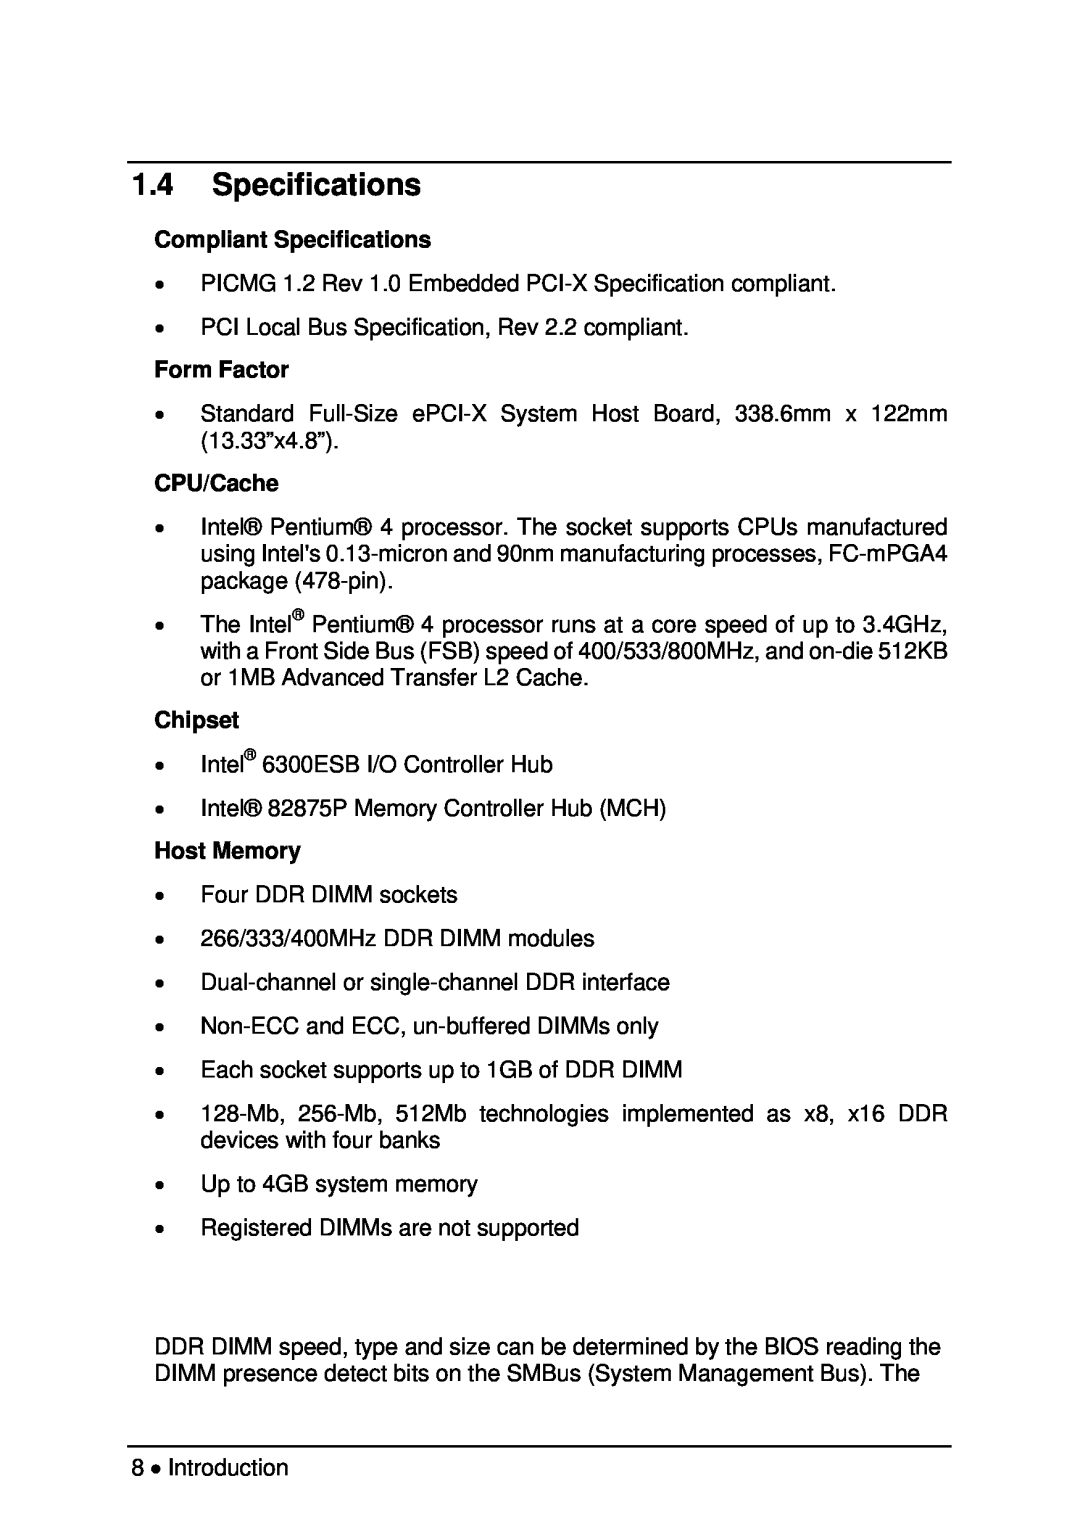 Intel NuPRO-850 user manual Compliant Specifications, Form Factor, CPU/Cache, Chipset, Host Memory 